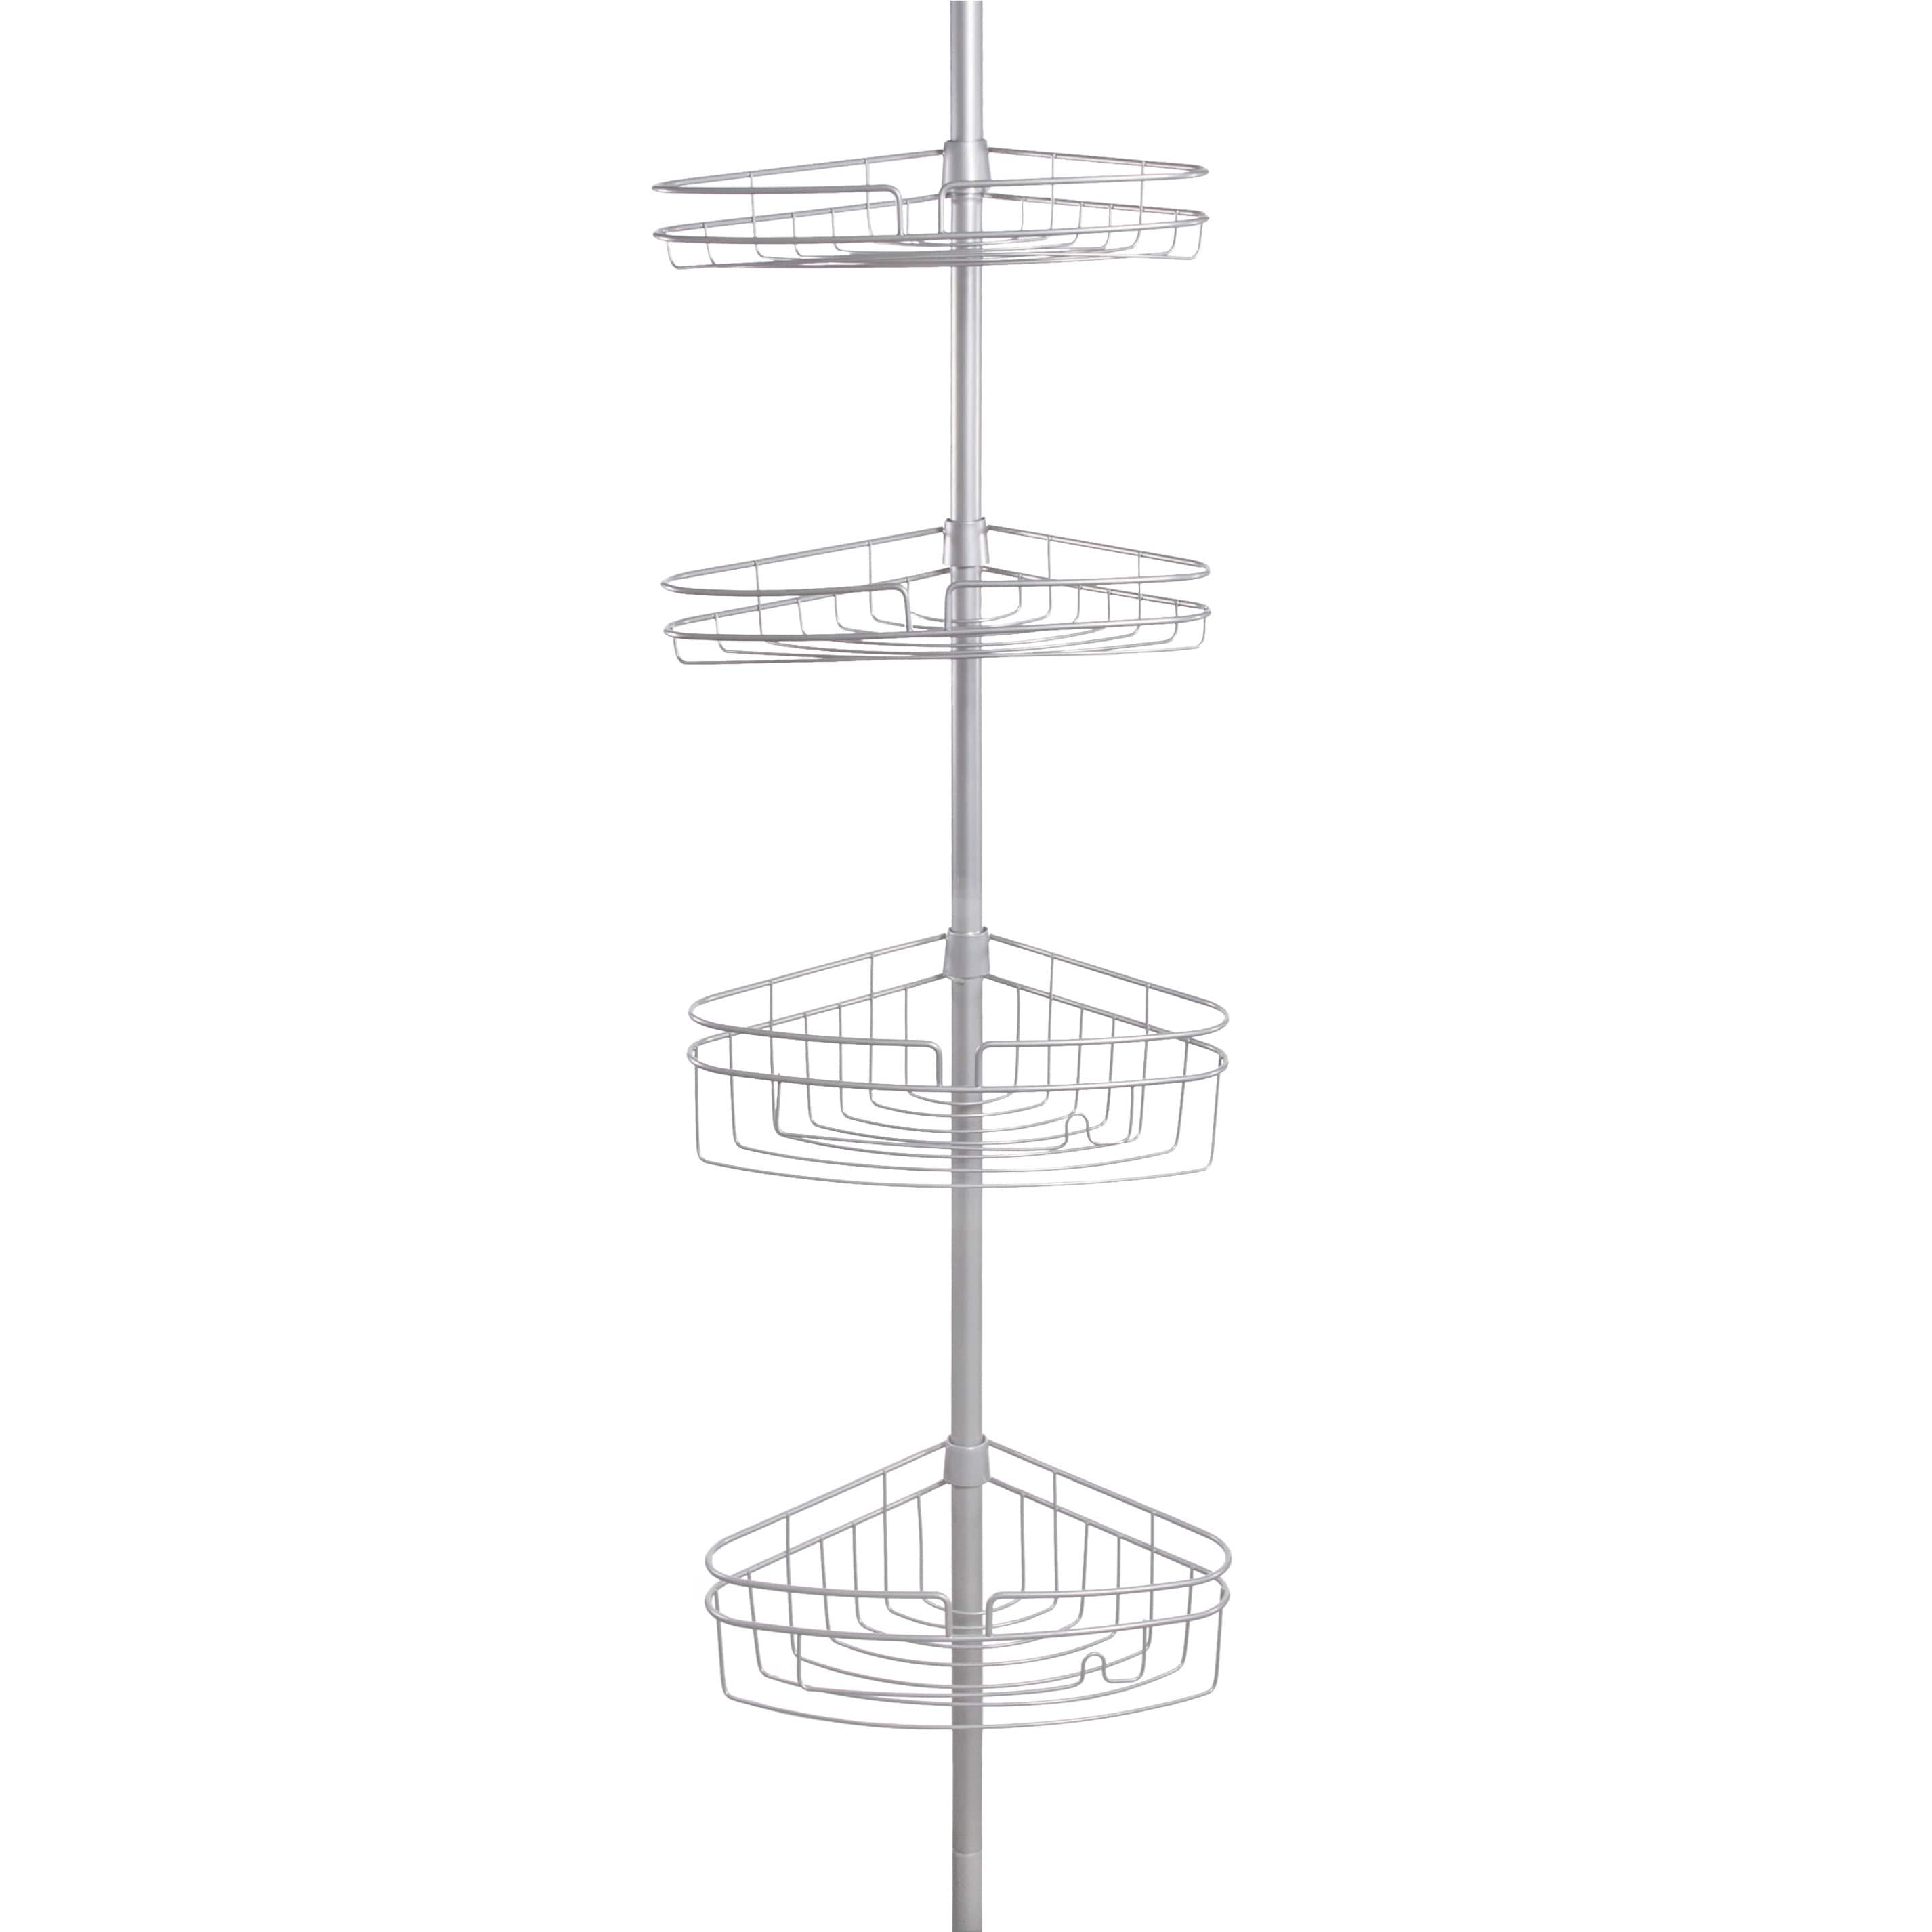 https://ak1.ostkcdn.com/images/products/is/images/direct/7fd20da1f94a5df2a333ab2823e8dd42bdd5233e/Kenney-4-Tier-Spring-Tension-Shower-Corner-Pole-Caddy-with-Razor-Holder.jpg